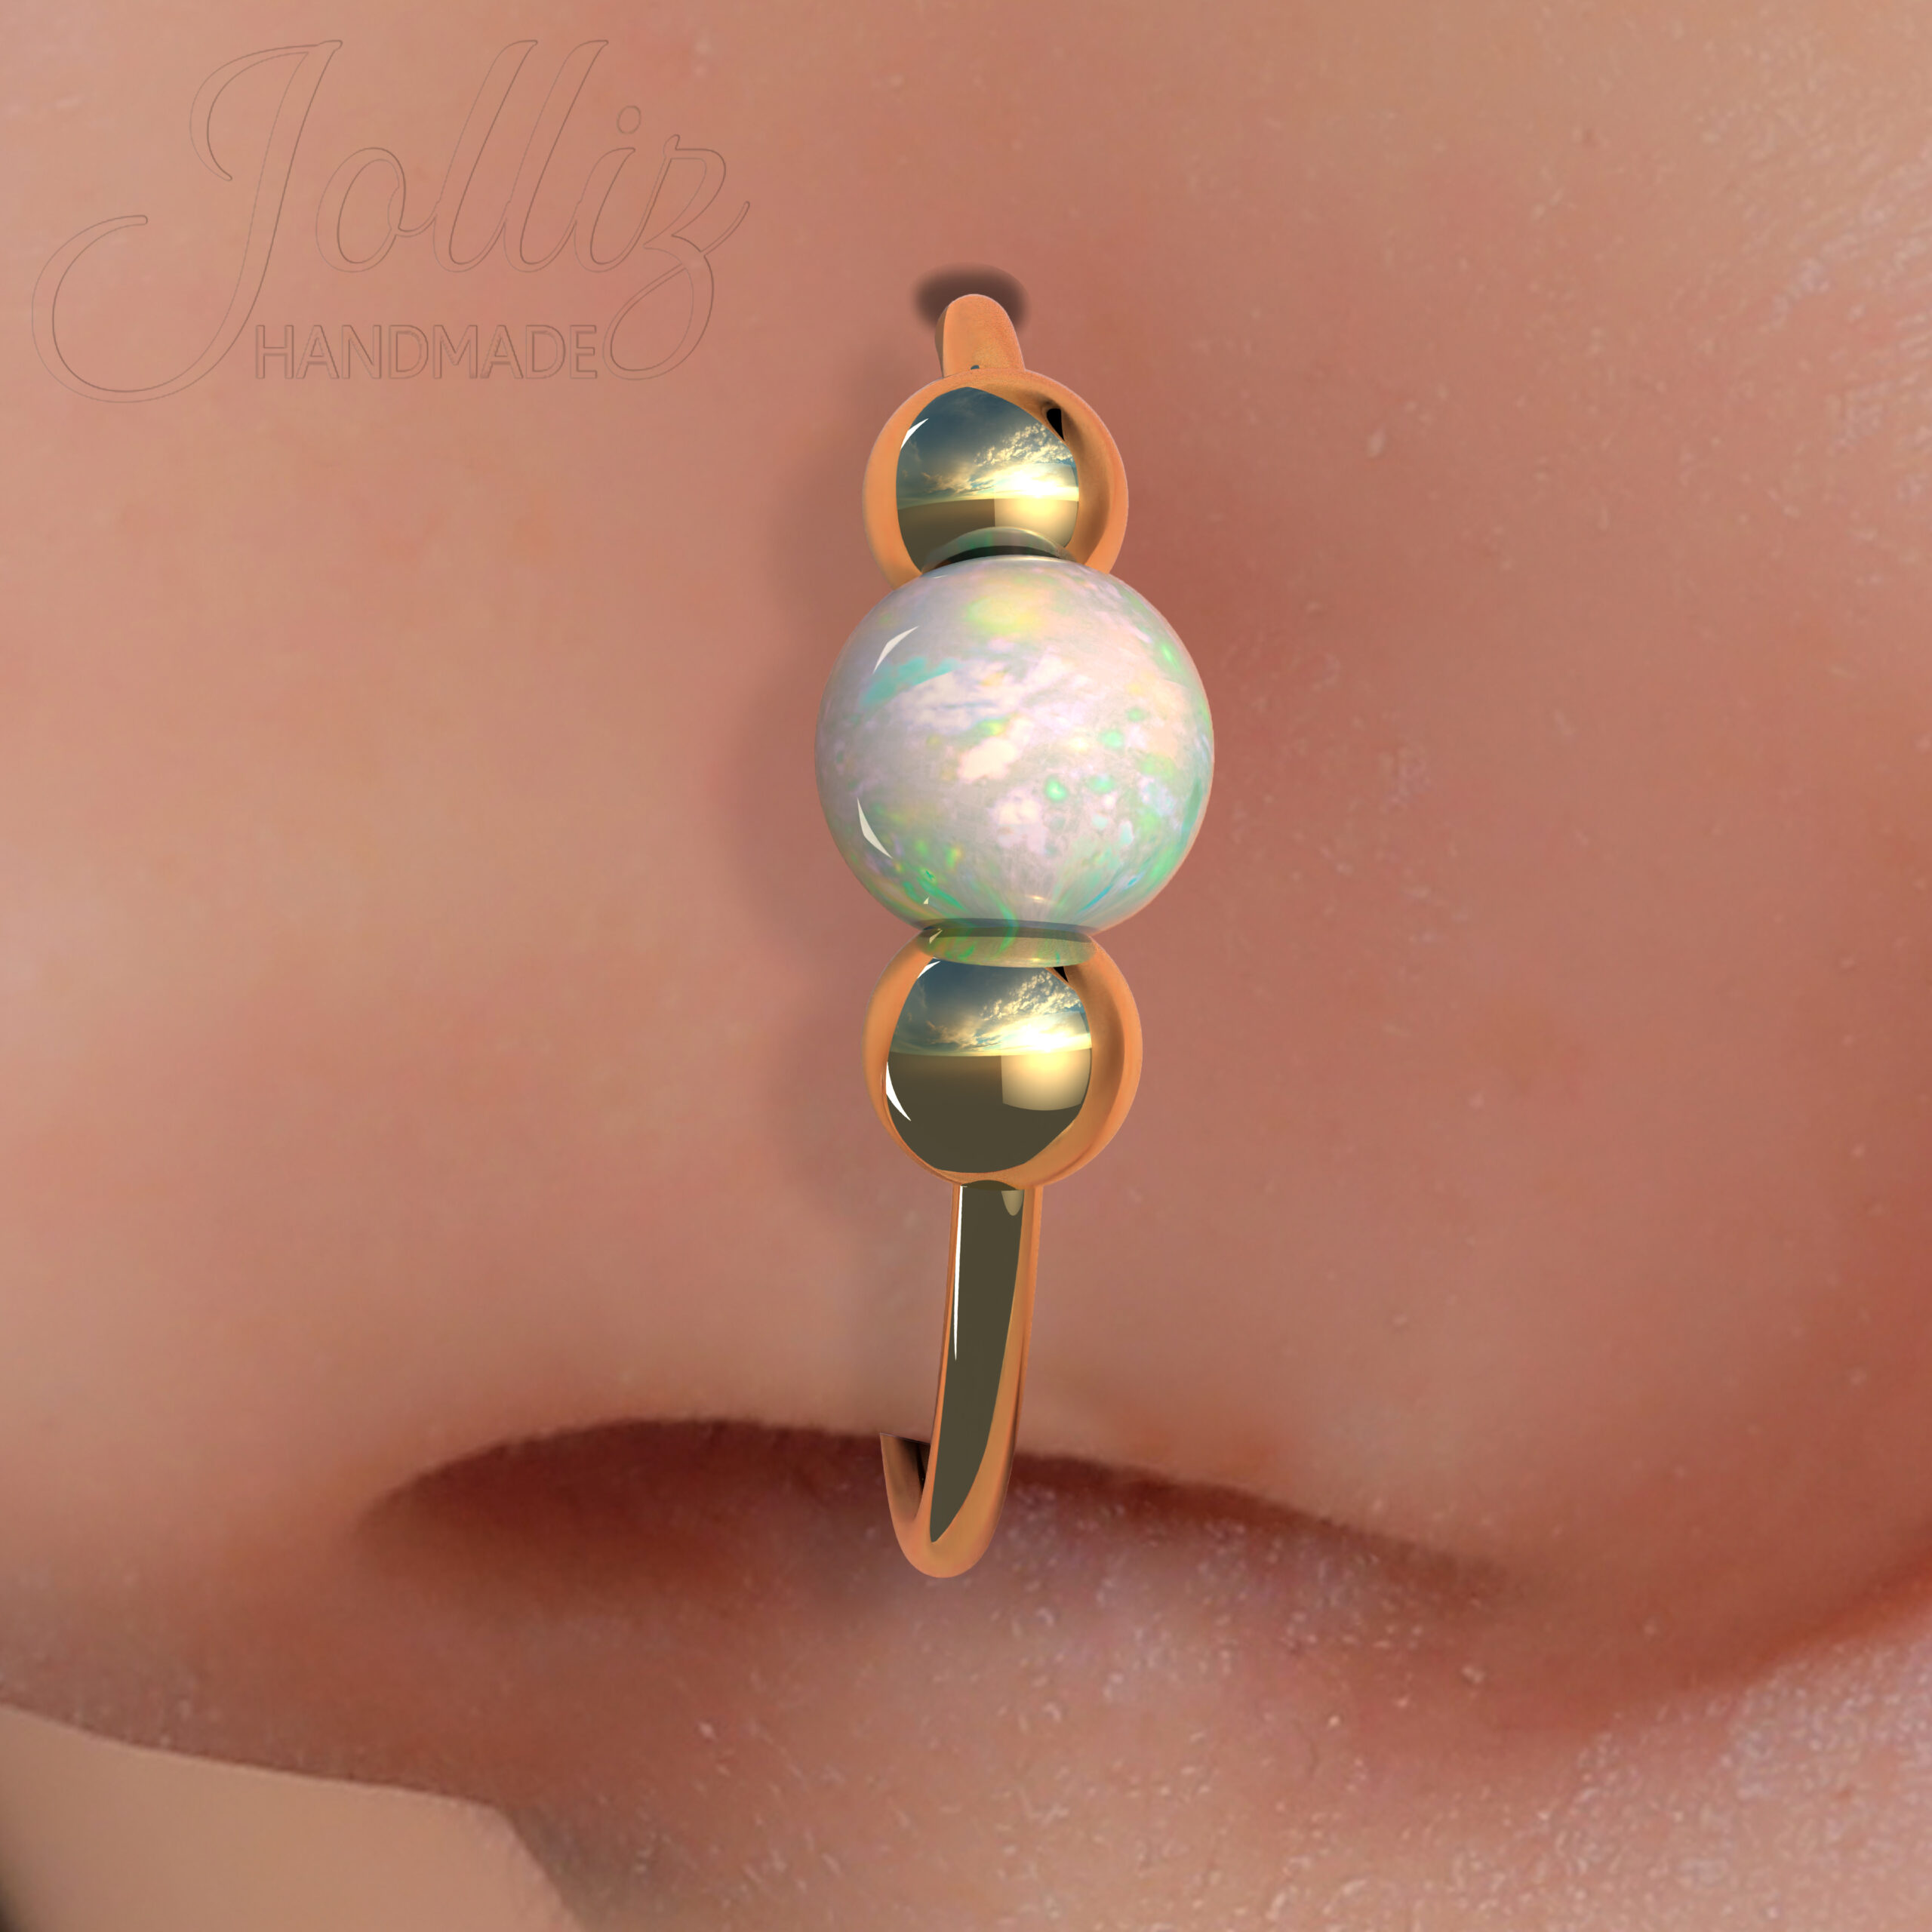 1.5mm Opal Stone 20G Silver Steel Extra Thin Small 0.8mm Nose Ring, 8mm Hoop,  Rainbow Nose Ring, Opal Ring Stud Tragus Cartilage Earrings